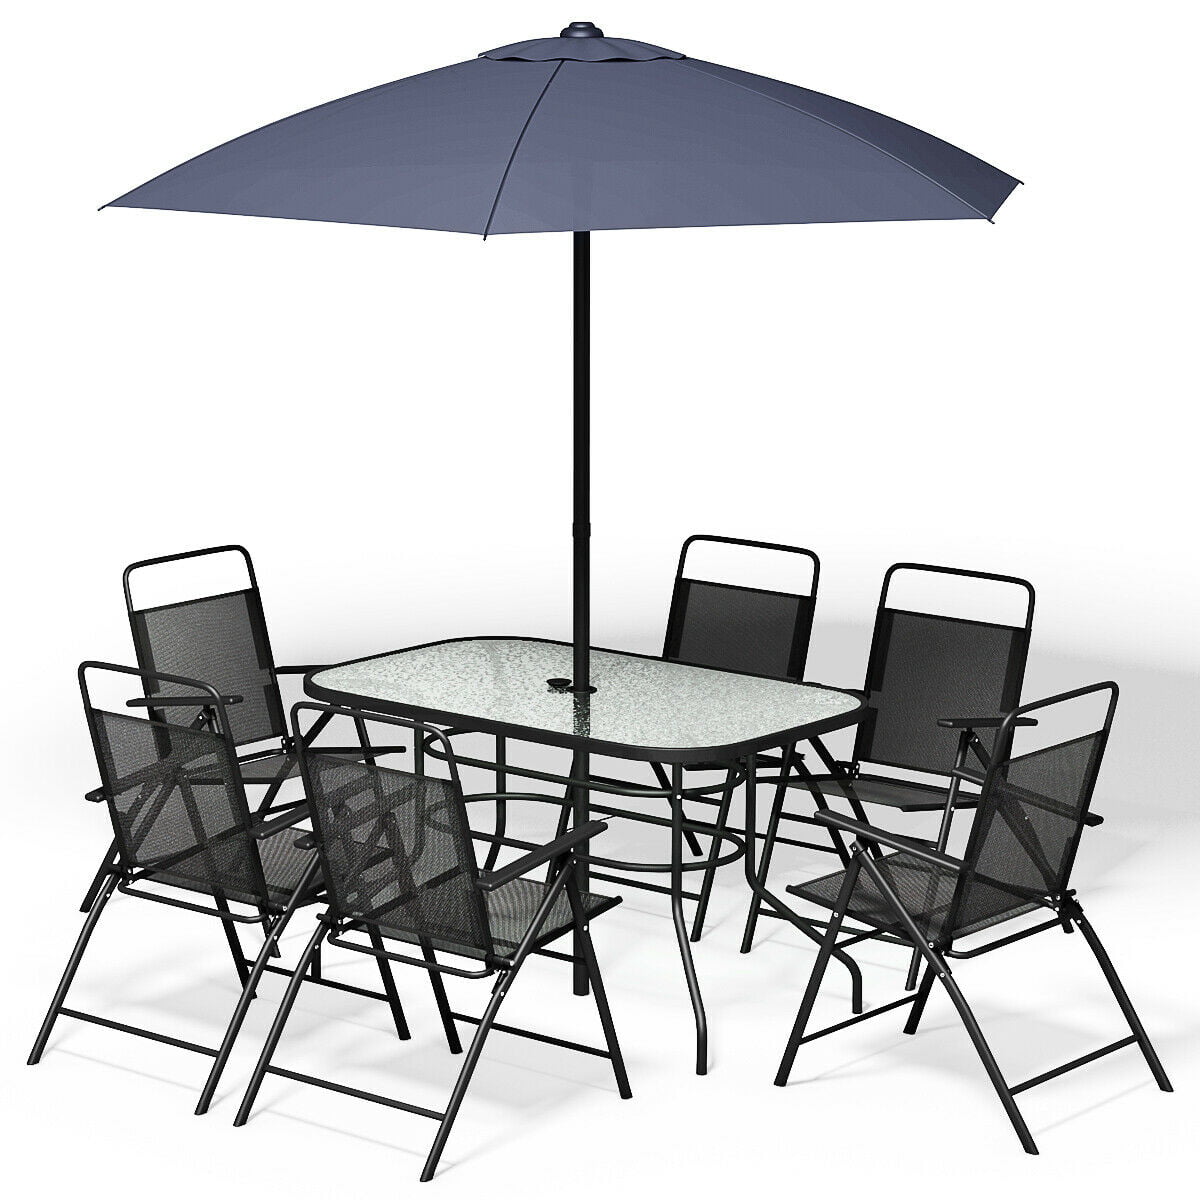 Furniture 6 Folding Chairs Table, Patio Chair And Table Set With Umbrella